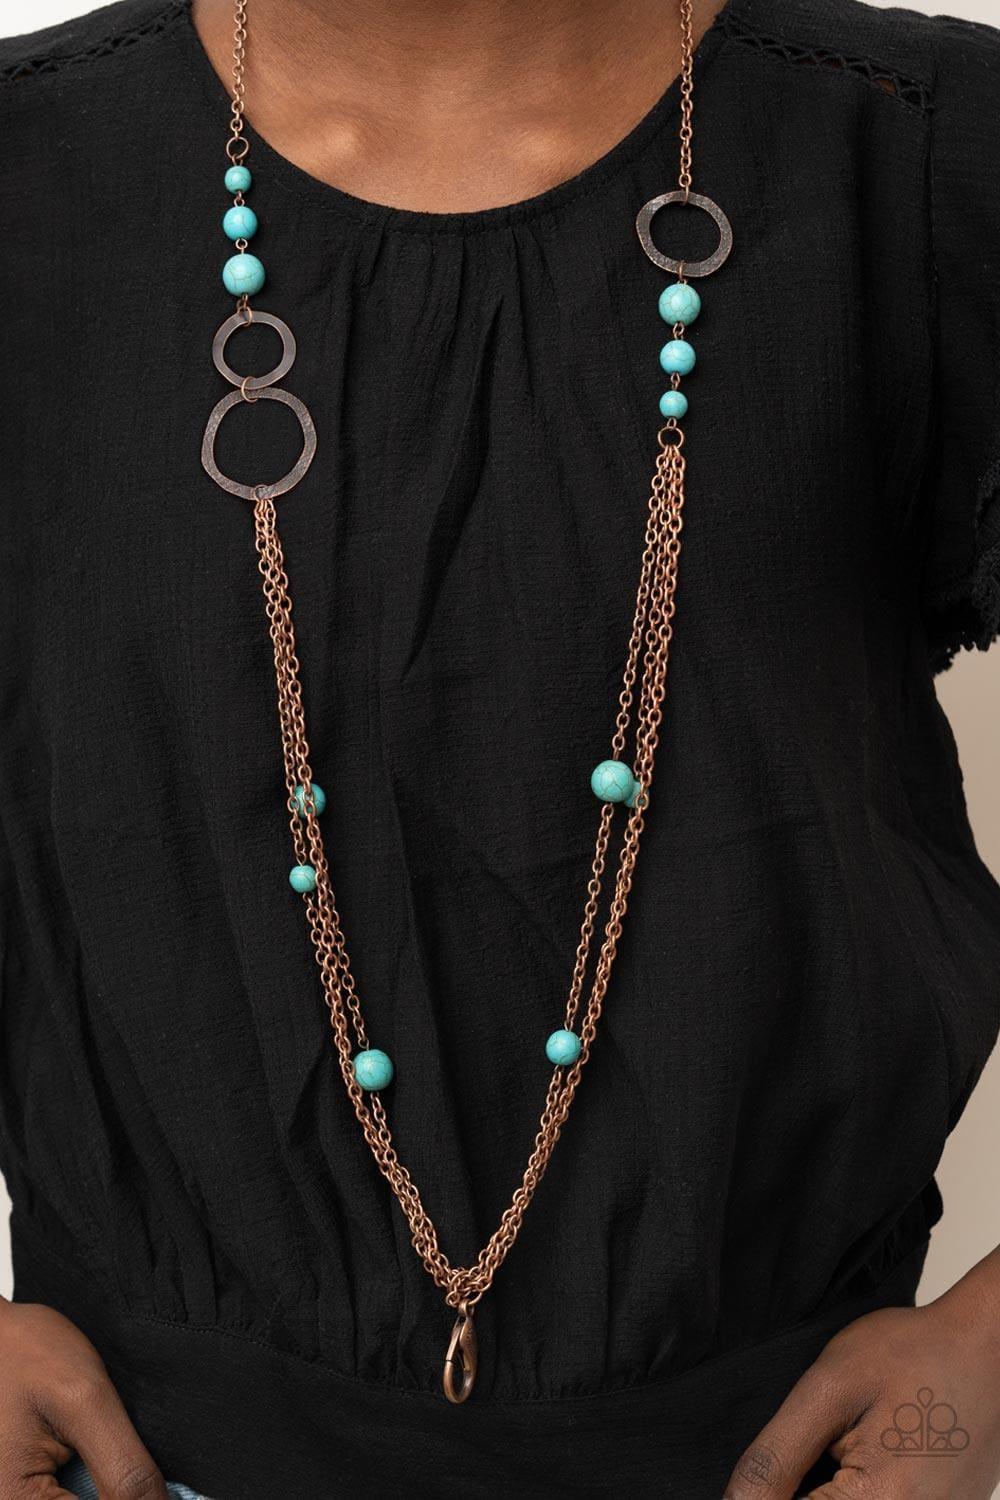 Paparazzi Accessories - Local Charm - Copper Lanyard Necklace - Bling by JessieK